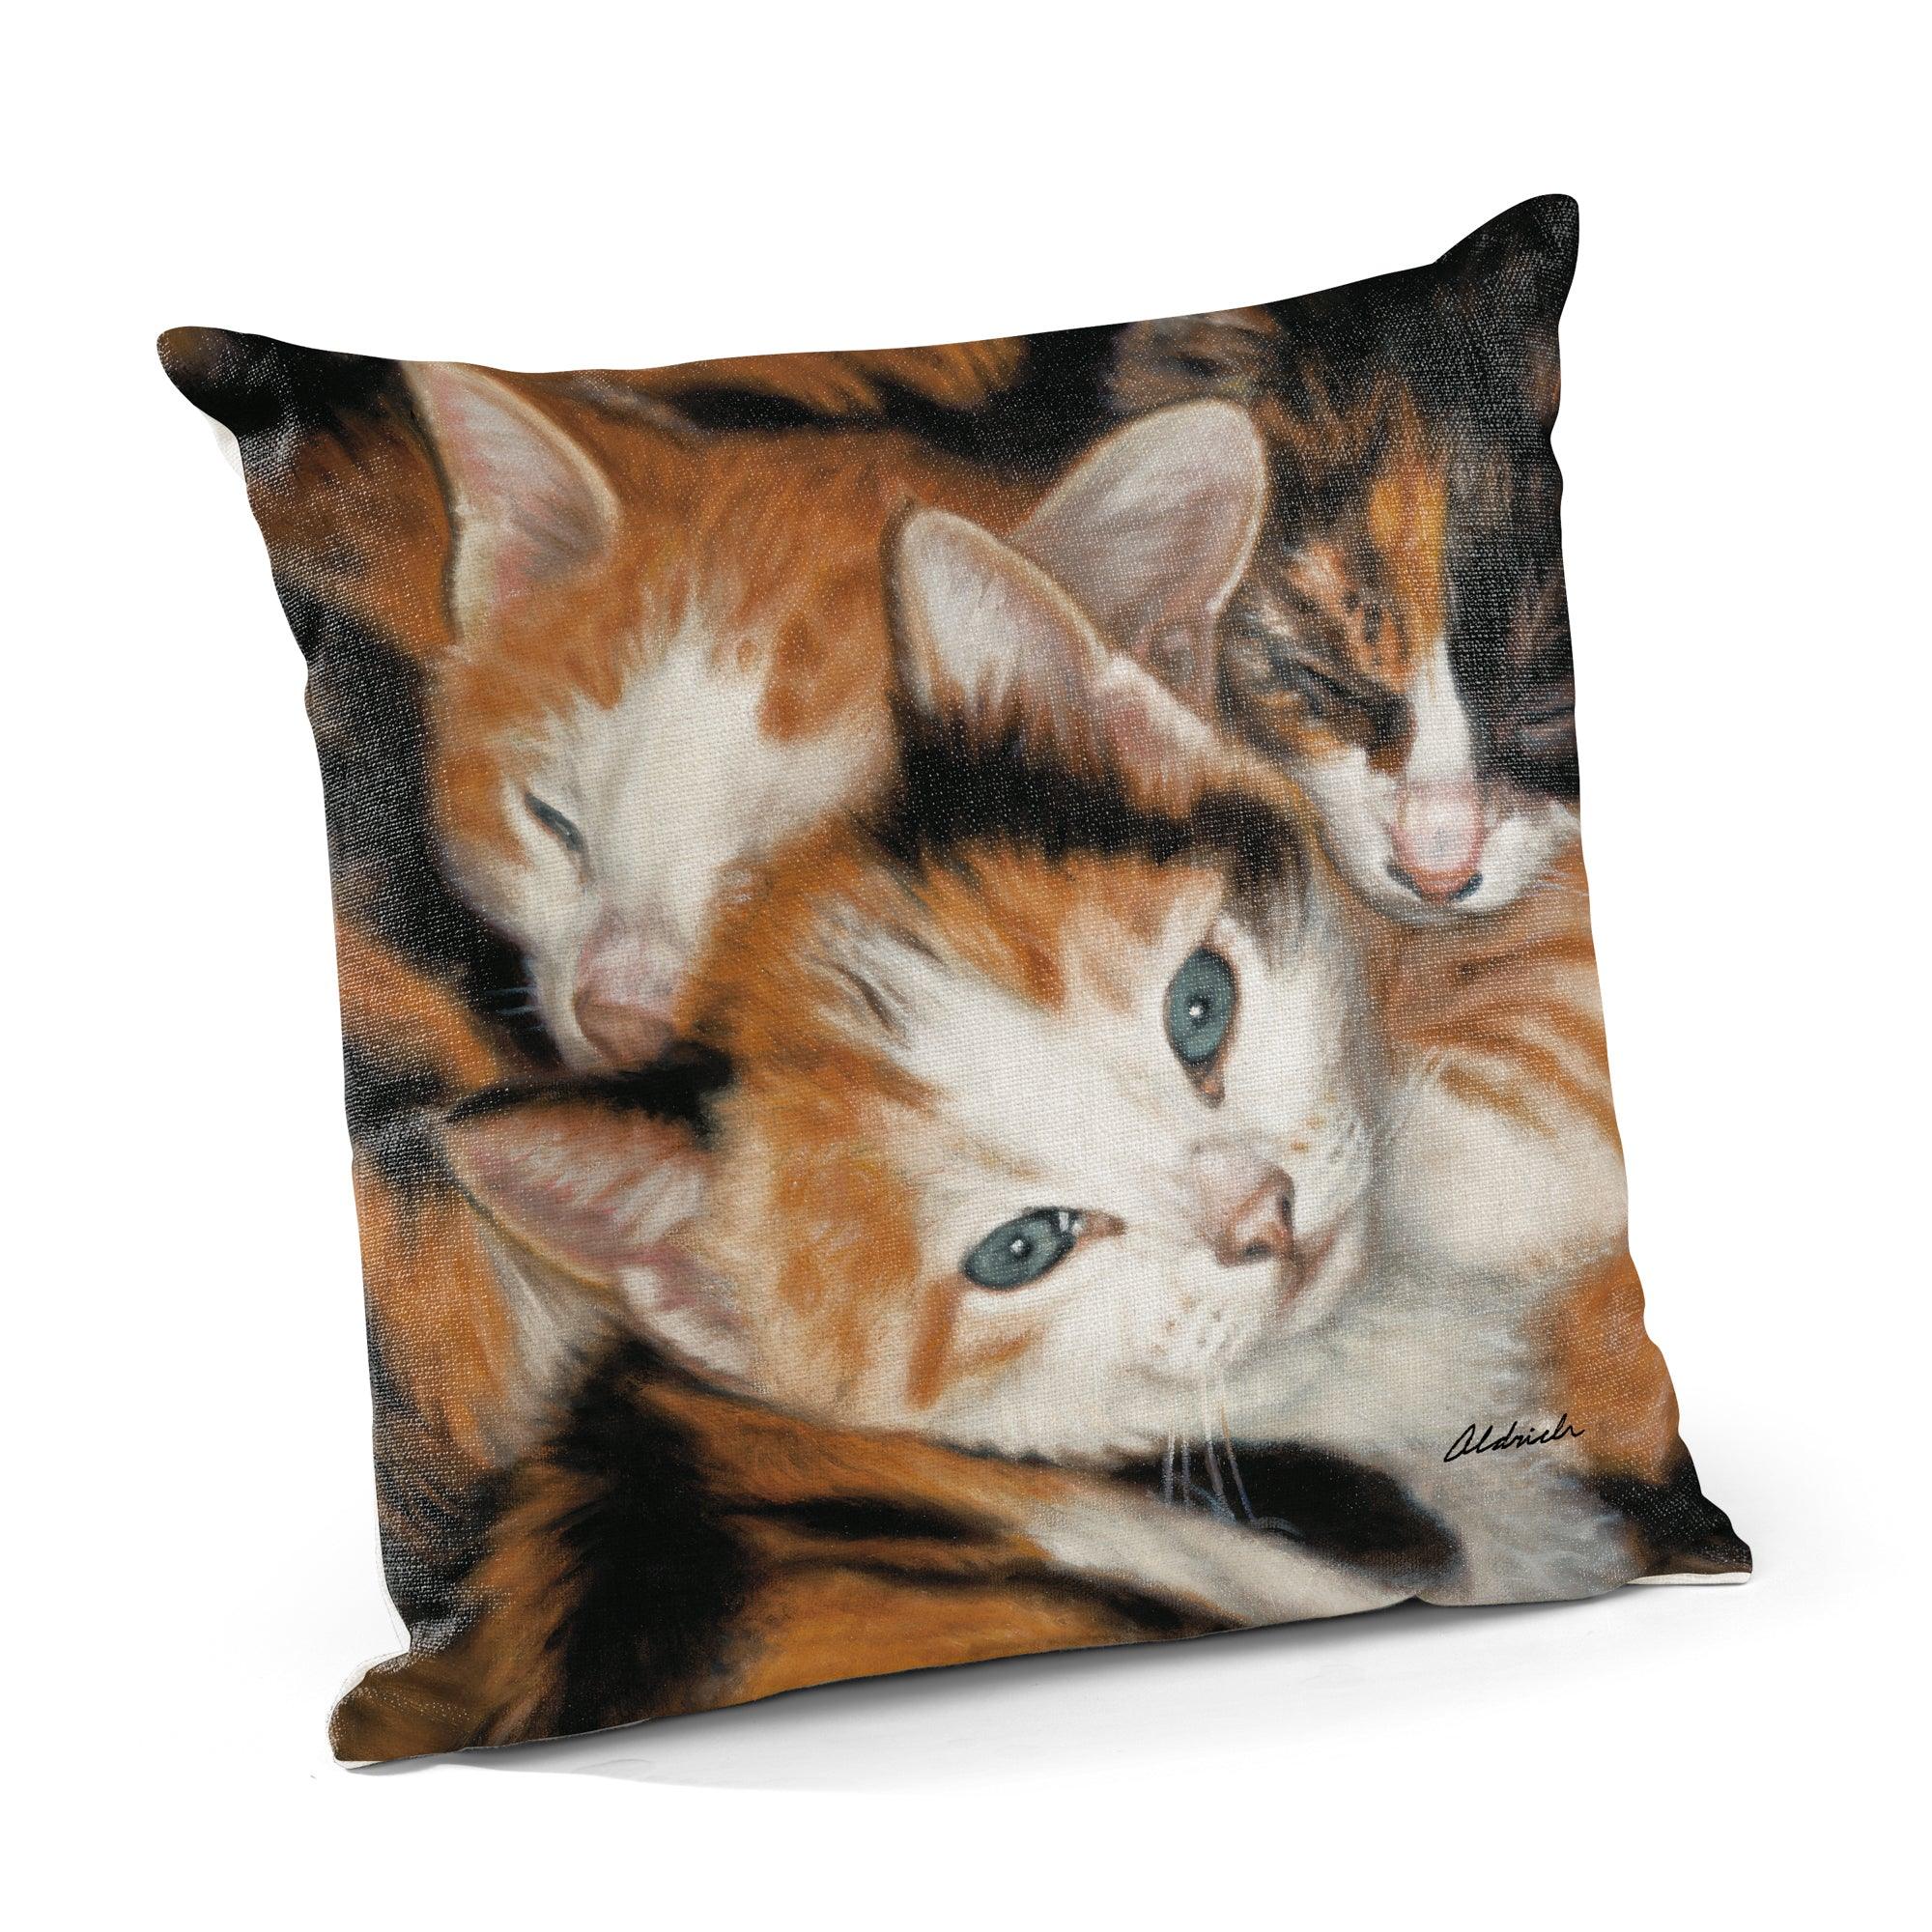 Who's Who? - Kittens 18" Decorative Pillow - Wild Wings